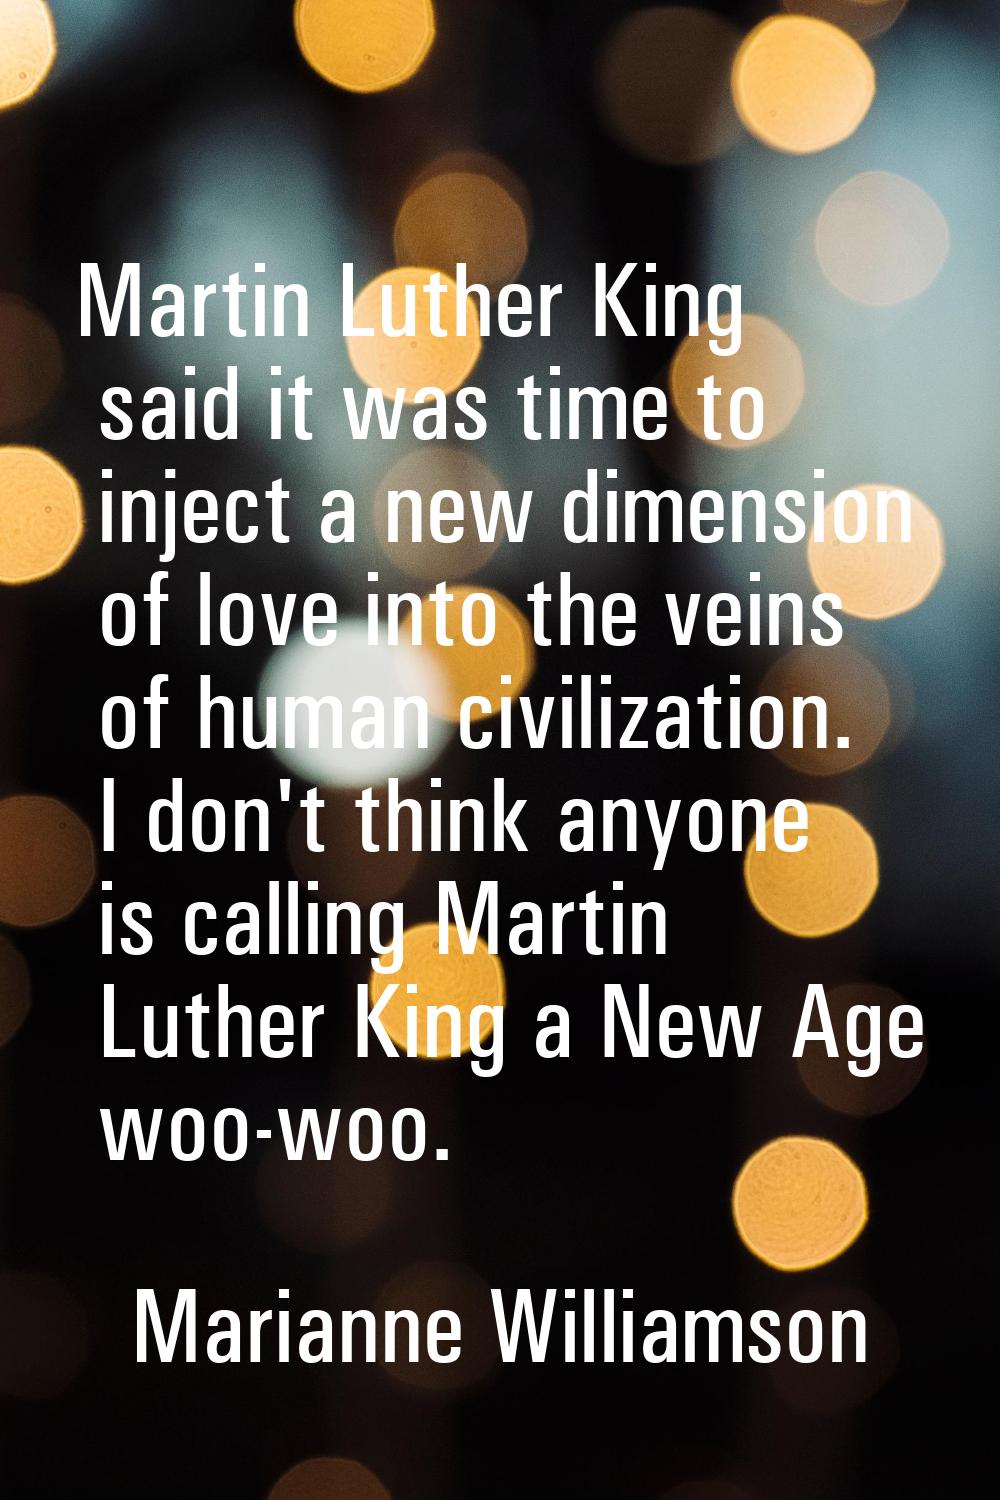 Martin Luther King said it was time to inject a new dimension of love into the veins of human civil